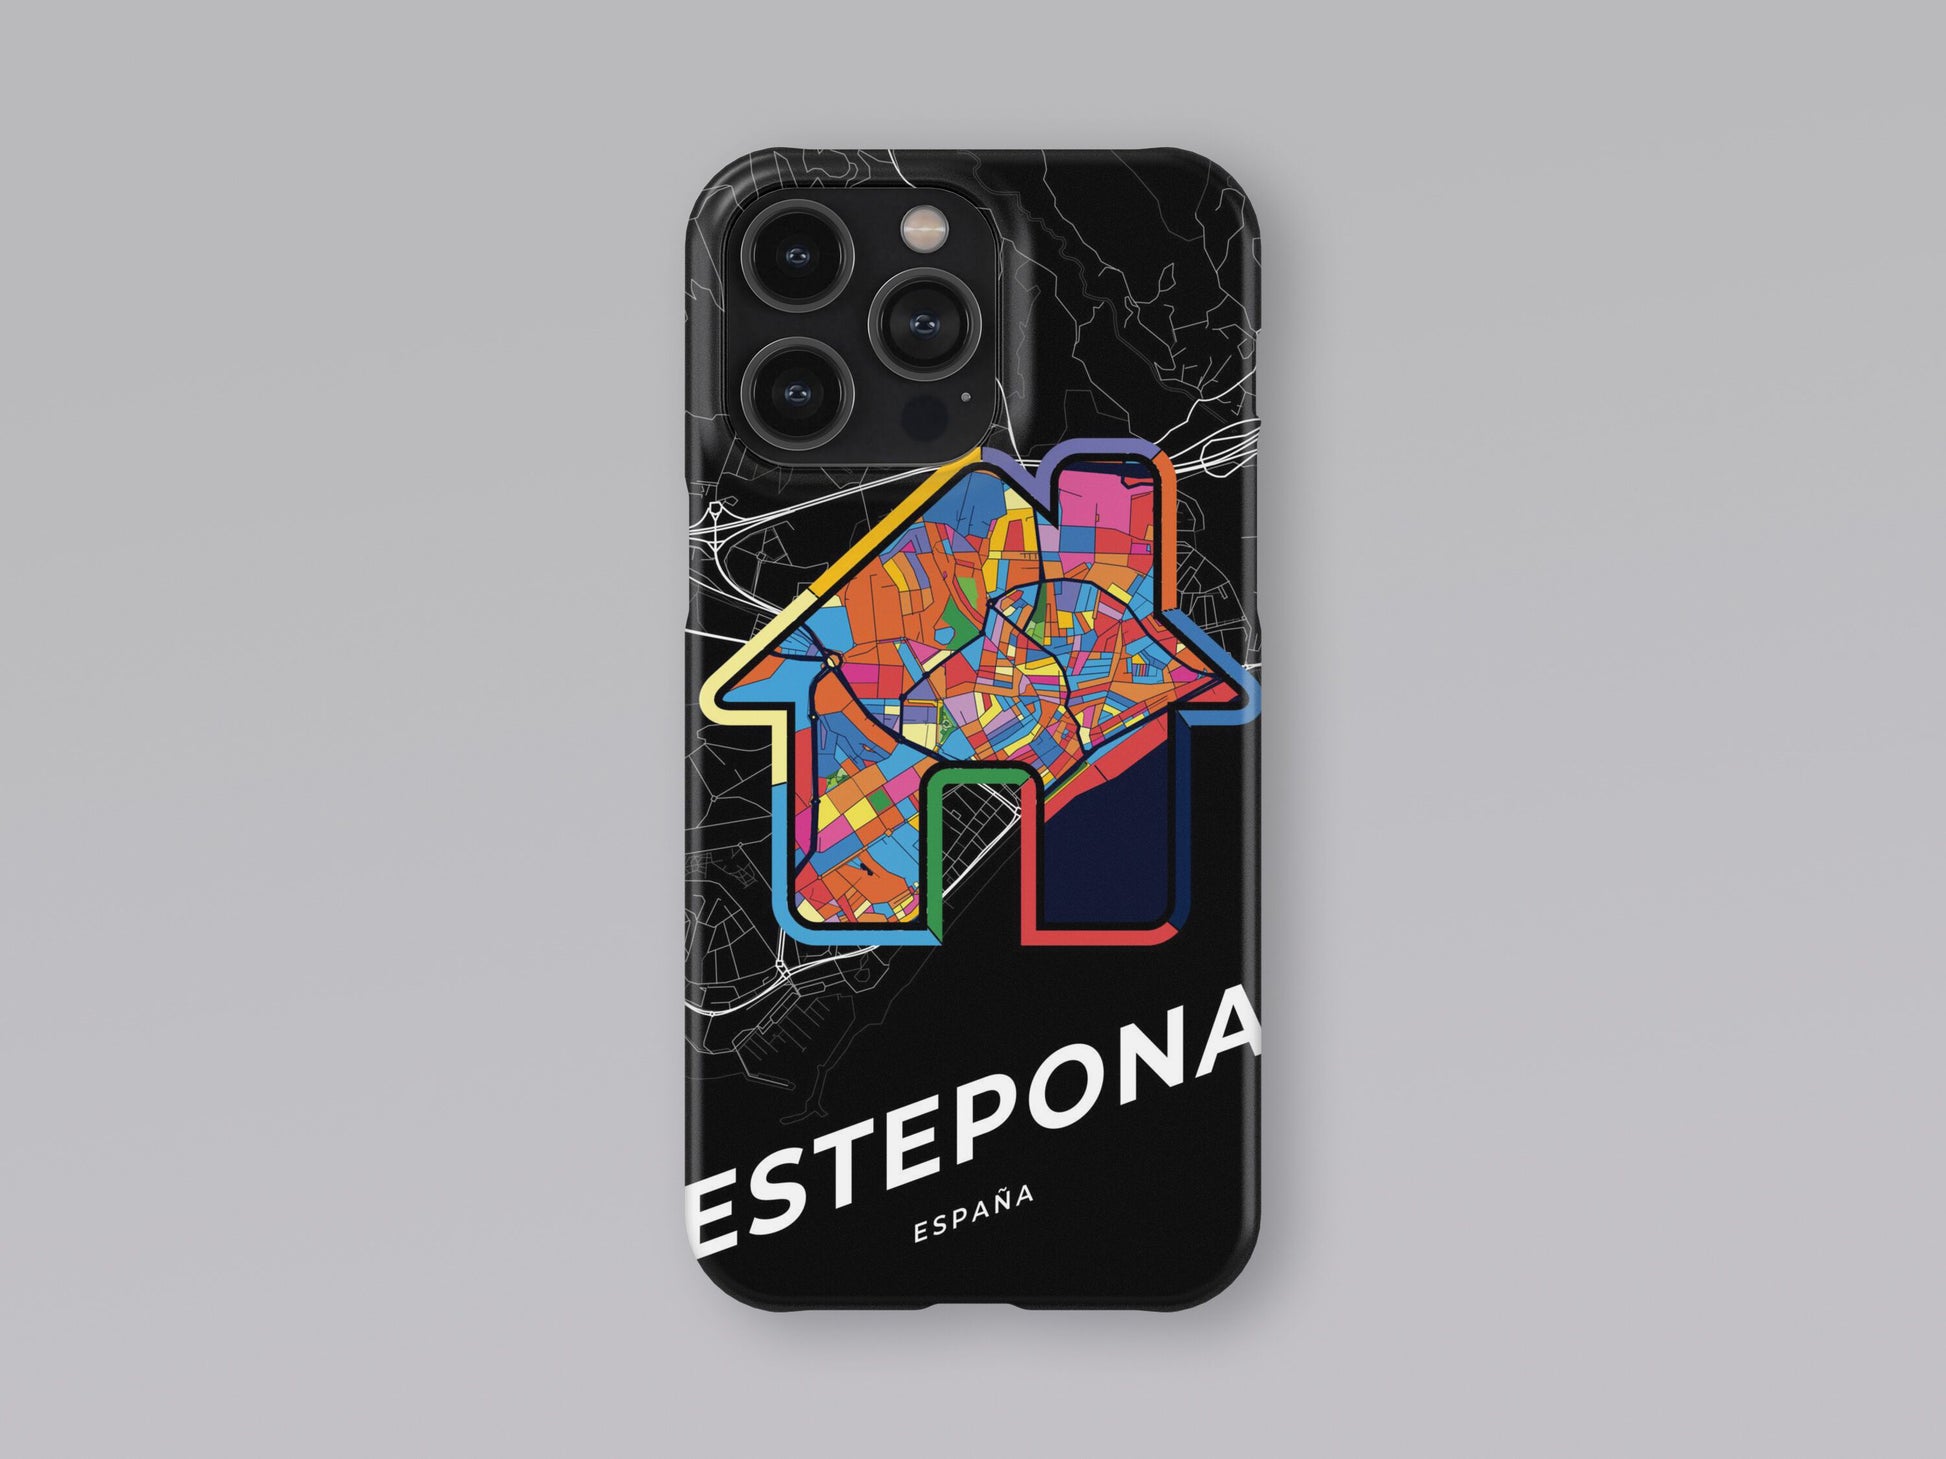 Estepona Spain slim phone case with colorful icon. Birthday, wedding or housewarming gift. Couple match cases. 3